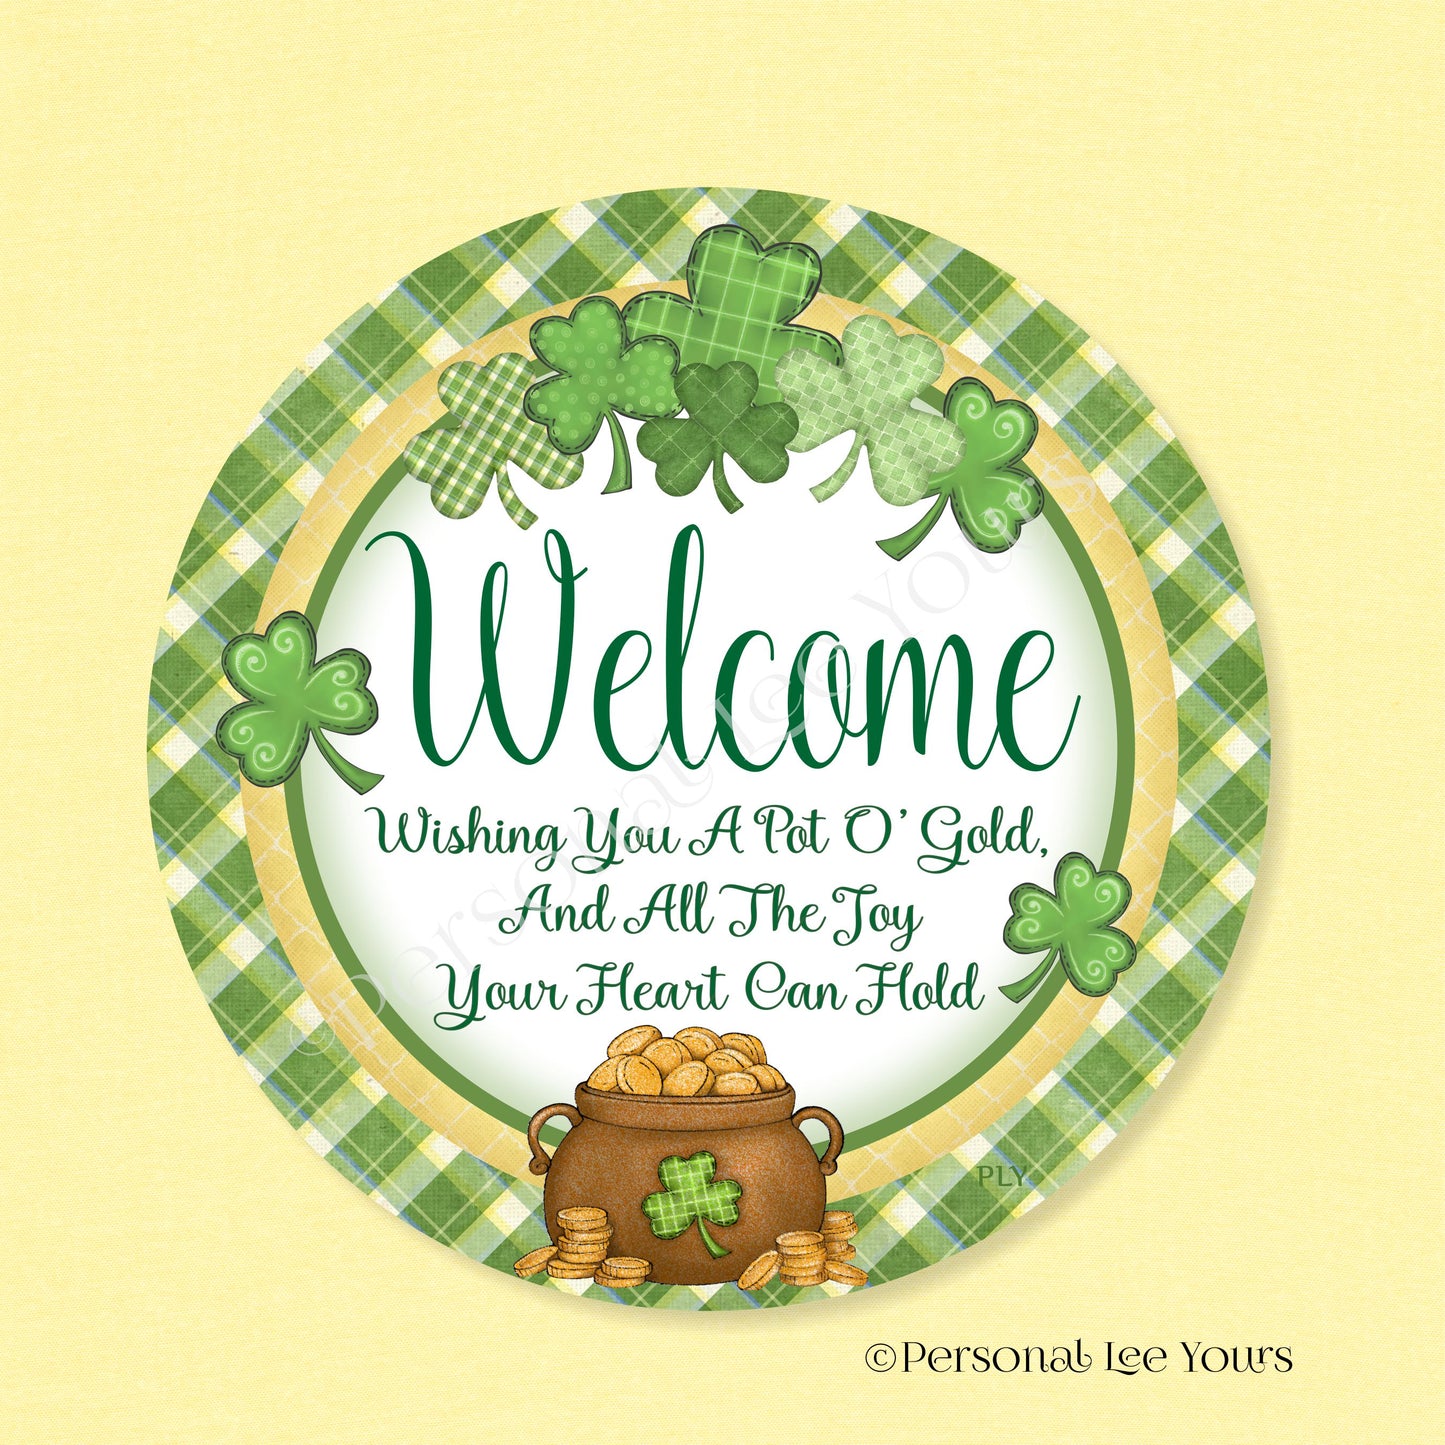 Irish Wreath Sign * Wishing You A Pot O' Gold Welcome * St. Patrick's Day * Round * Lightweight Metal